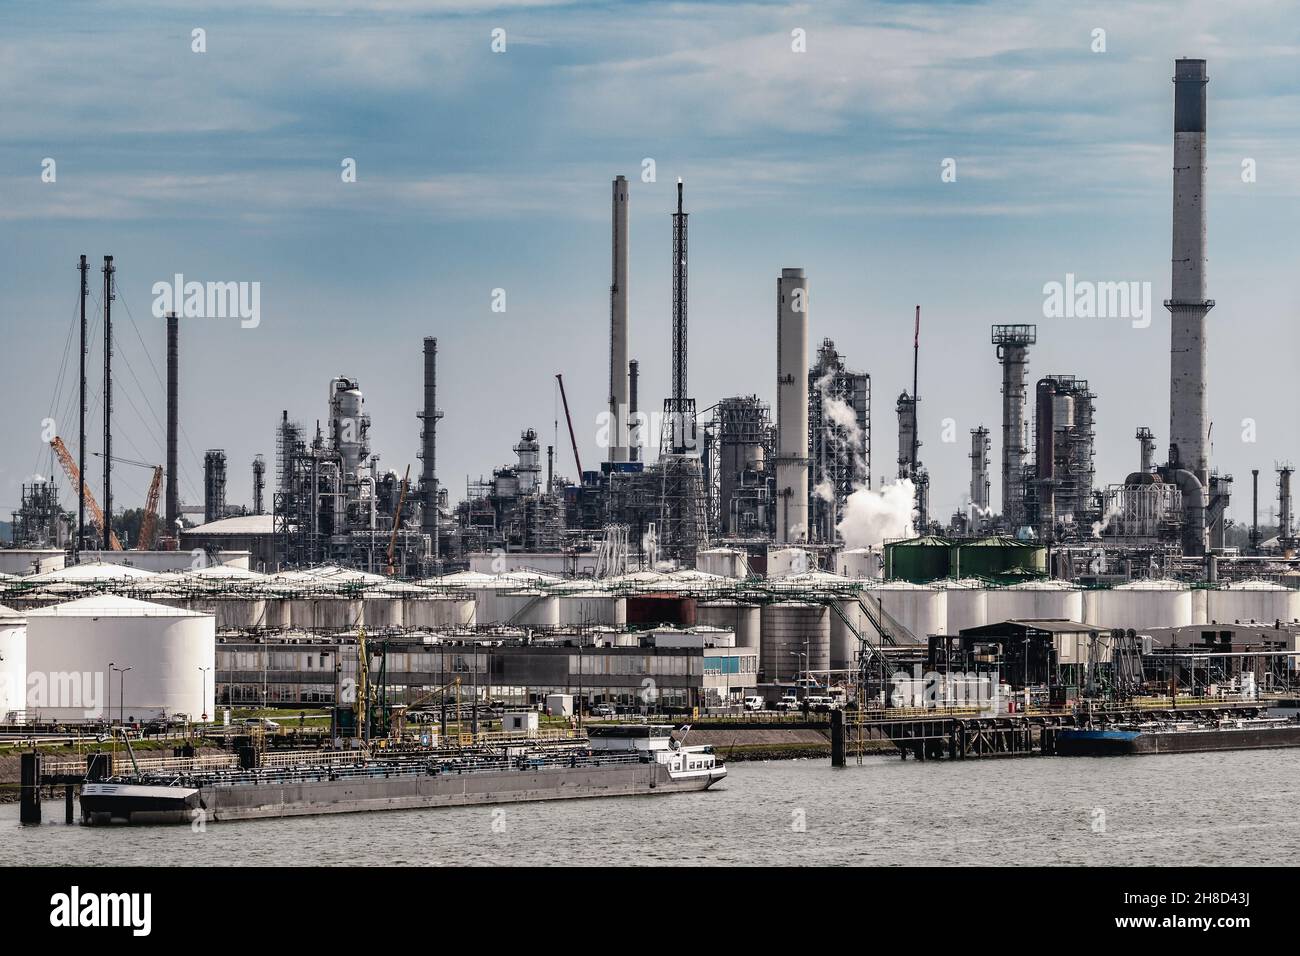 Oil refinery industrial petrochemical plant factory and barges in an industrial shipping port Stock Photo